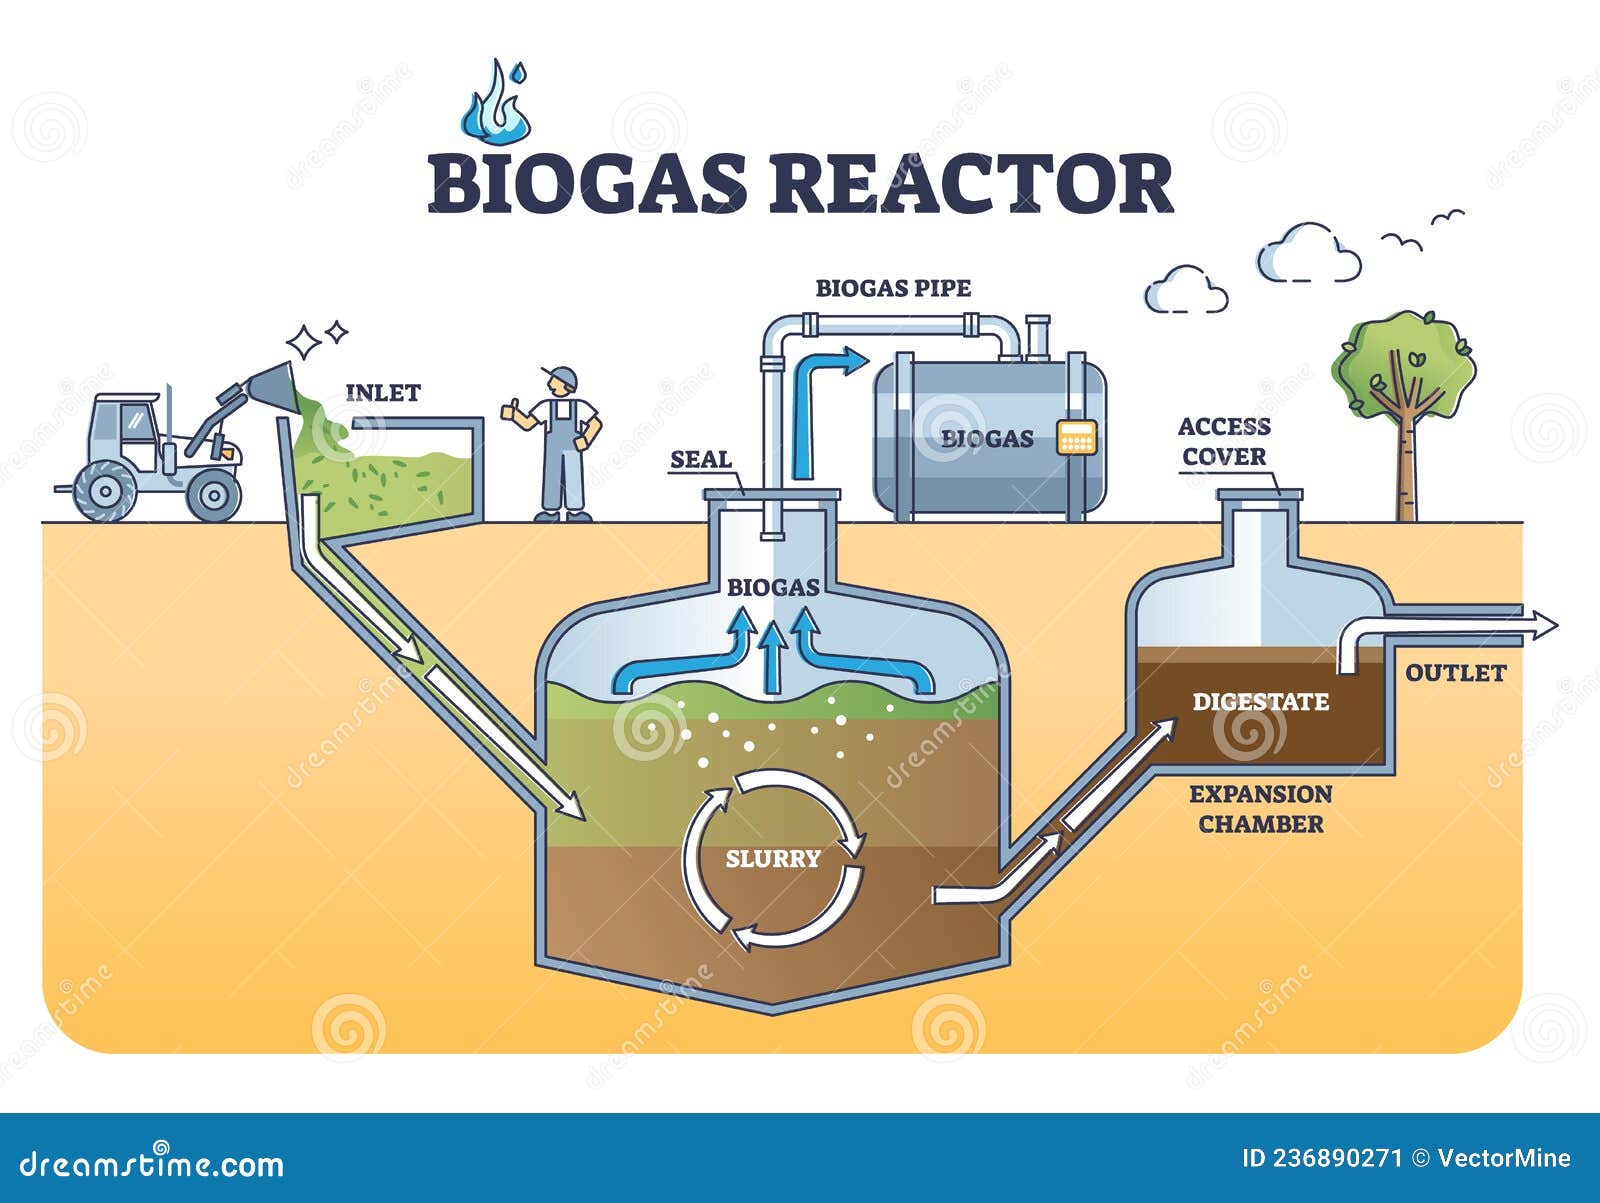 biogas reactor working principle with underground structure outline diagram